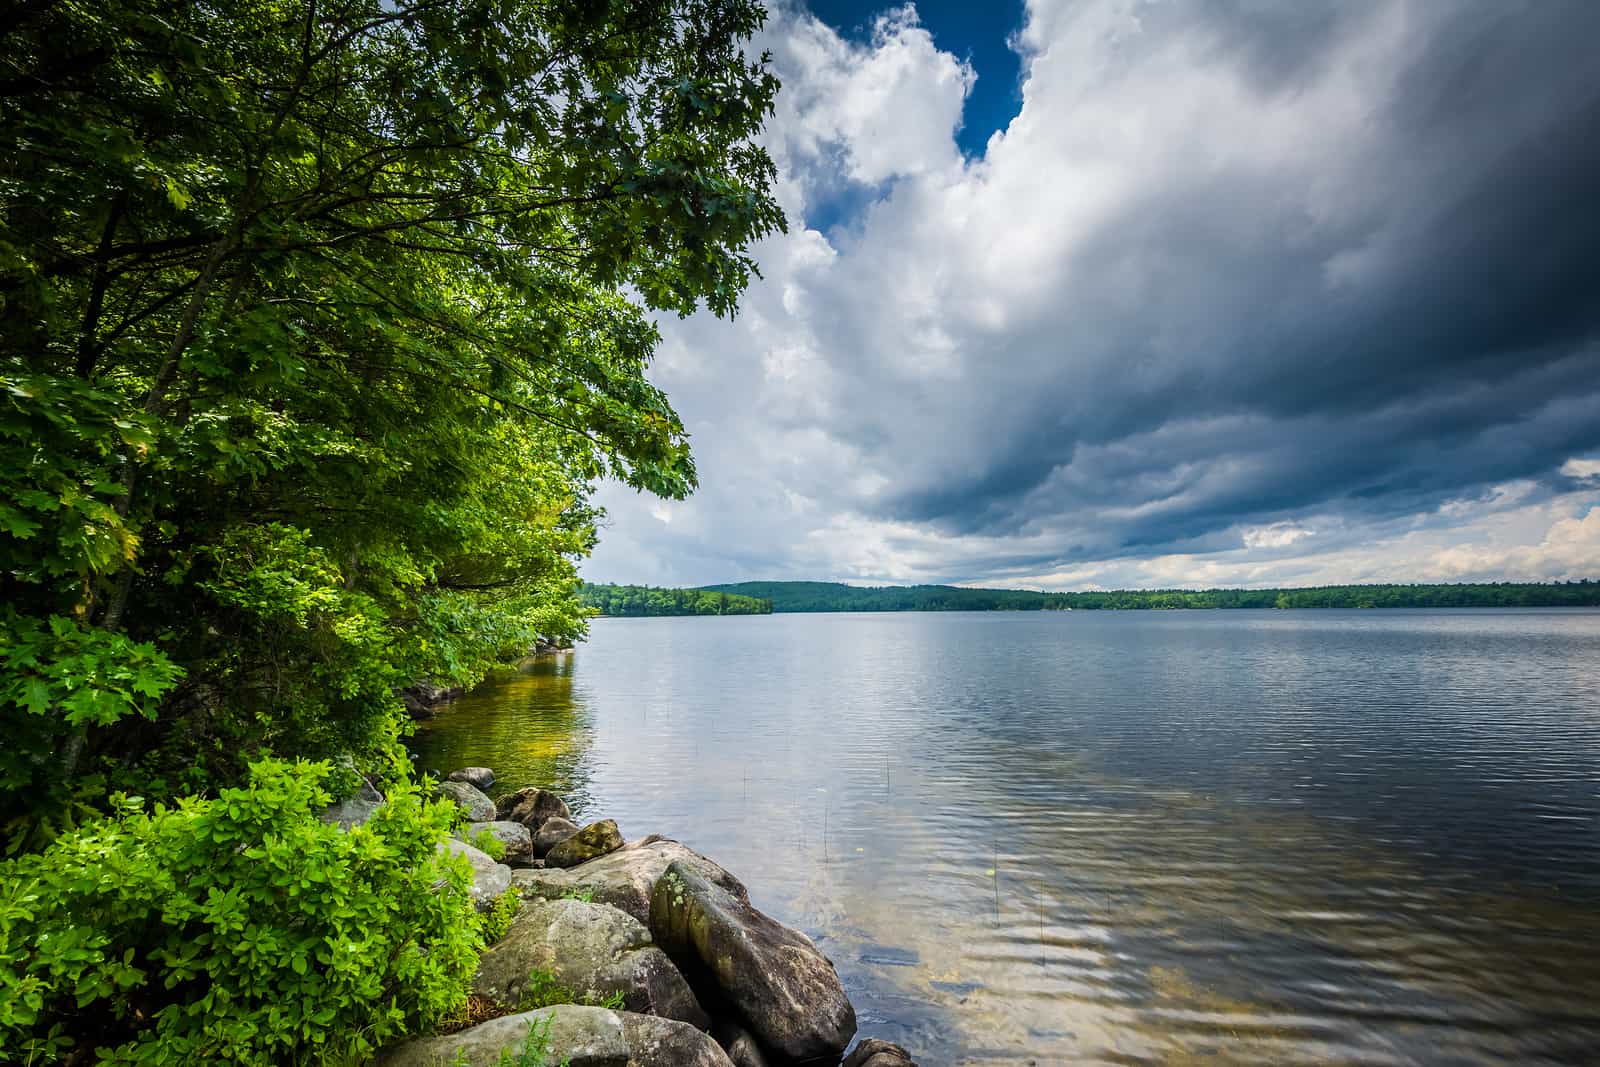 Green trees on the left with a body of water on the right and puffy white clouds in the sky in New England.